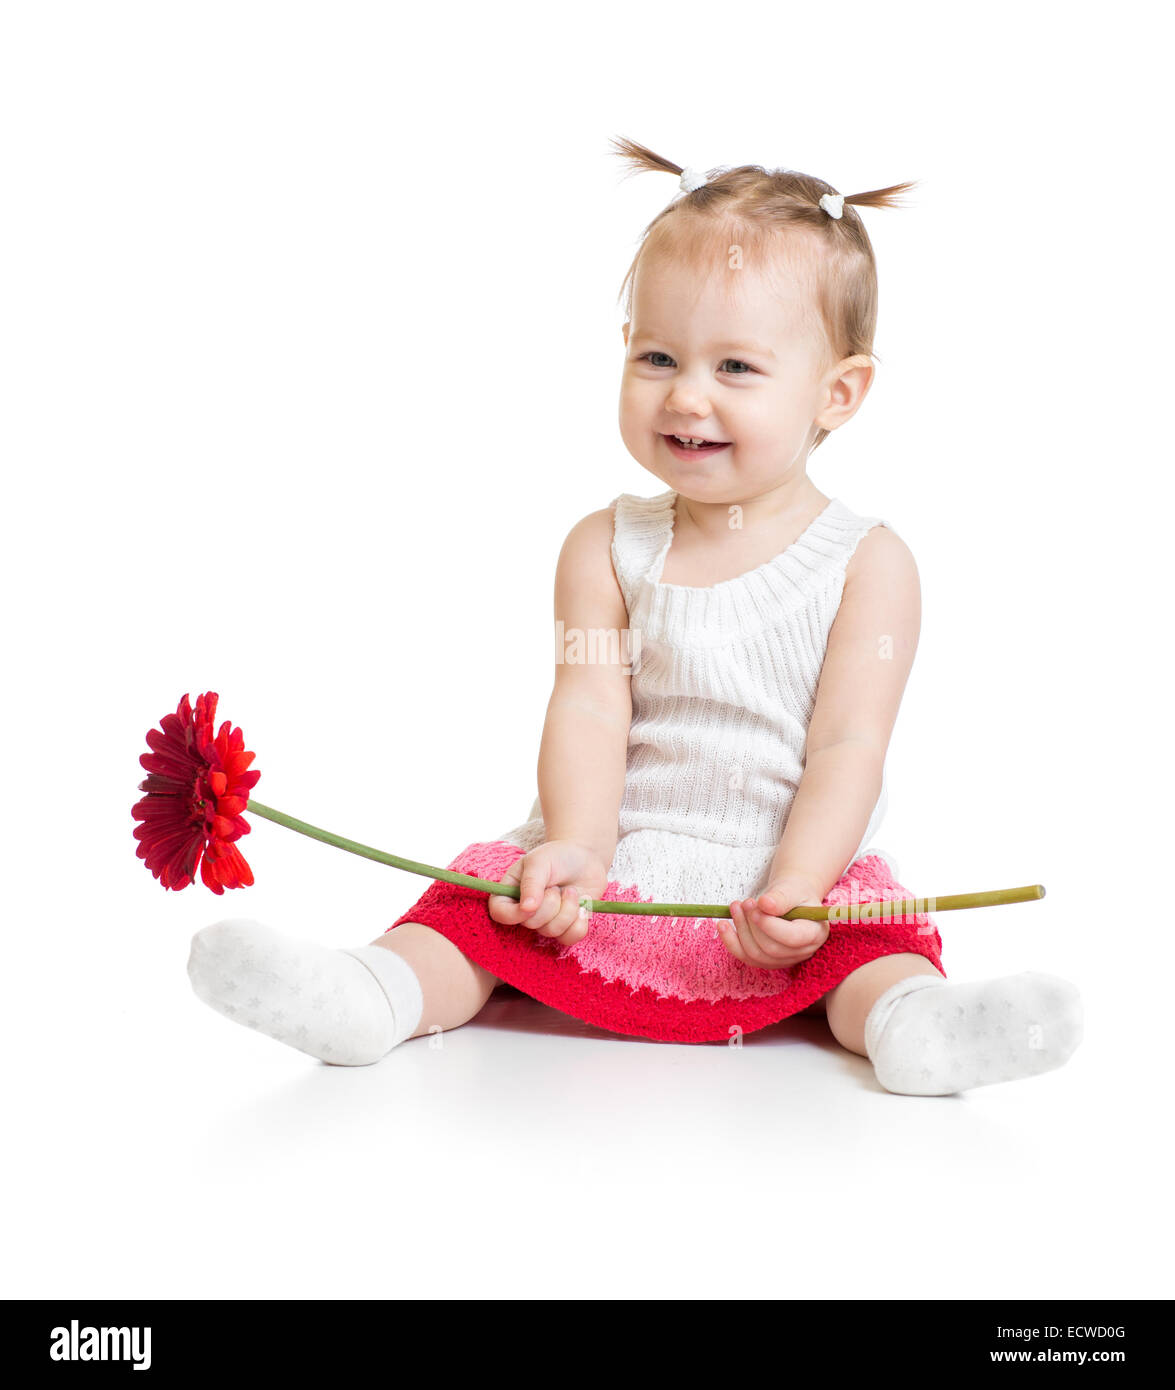 Adorable baby girl sitting with flower isolated Stock Photo